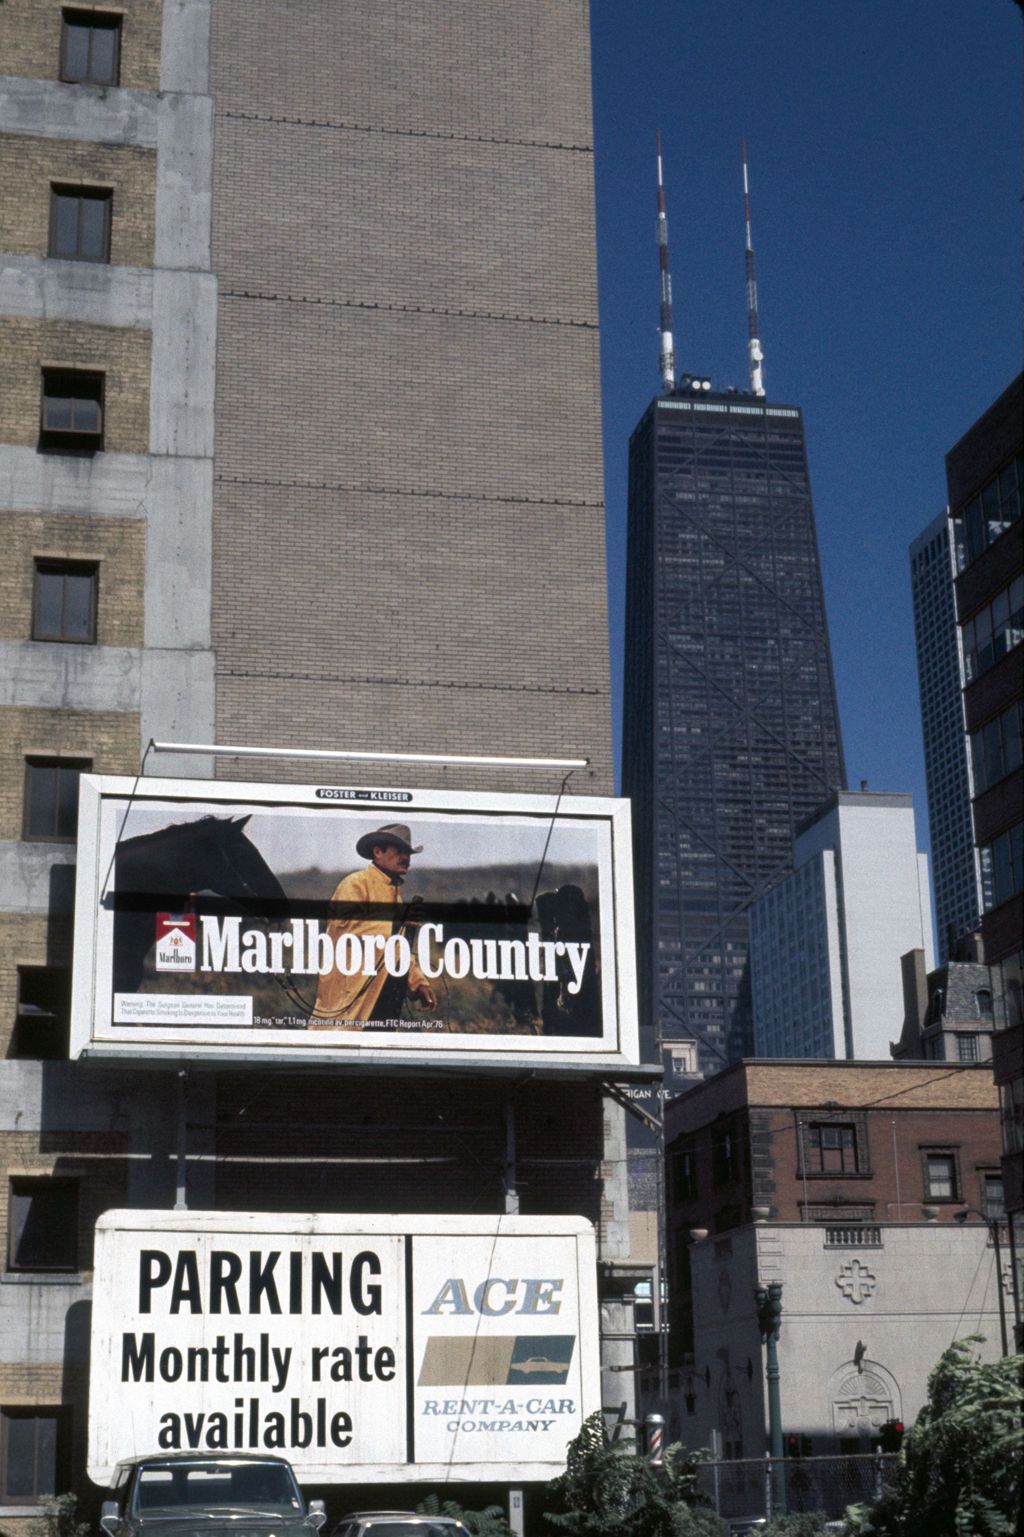 Miniature of Billboard advertisements for cigarettes and rental cars